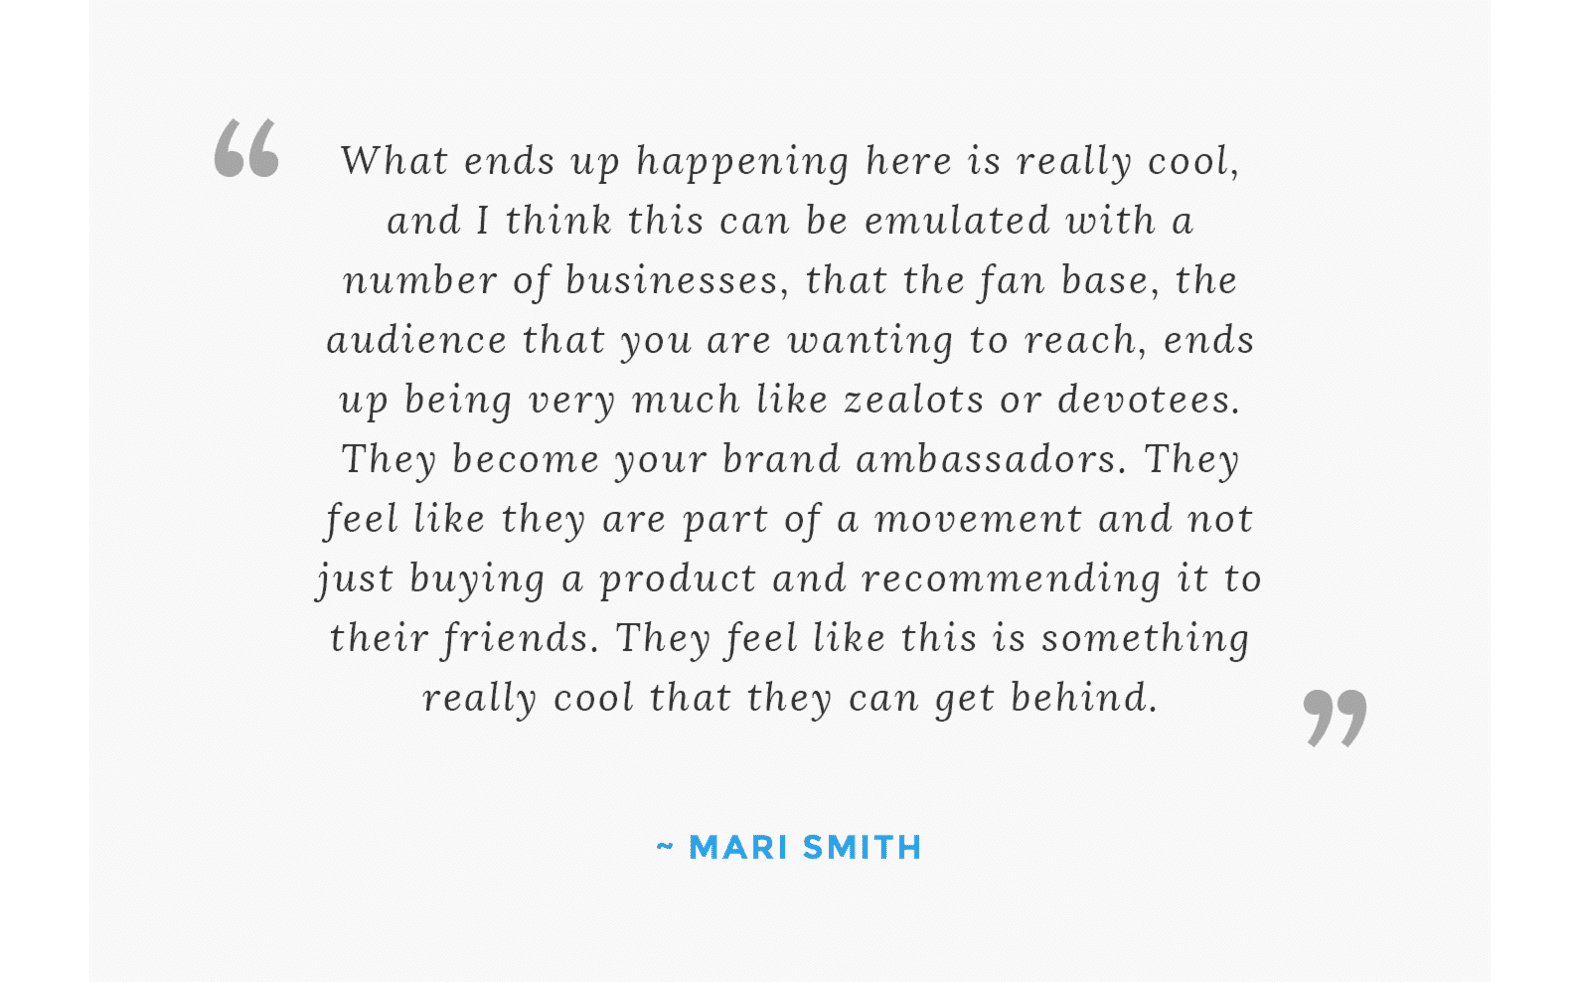 Quote from Mari Smith